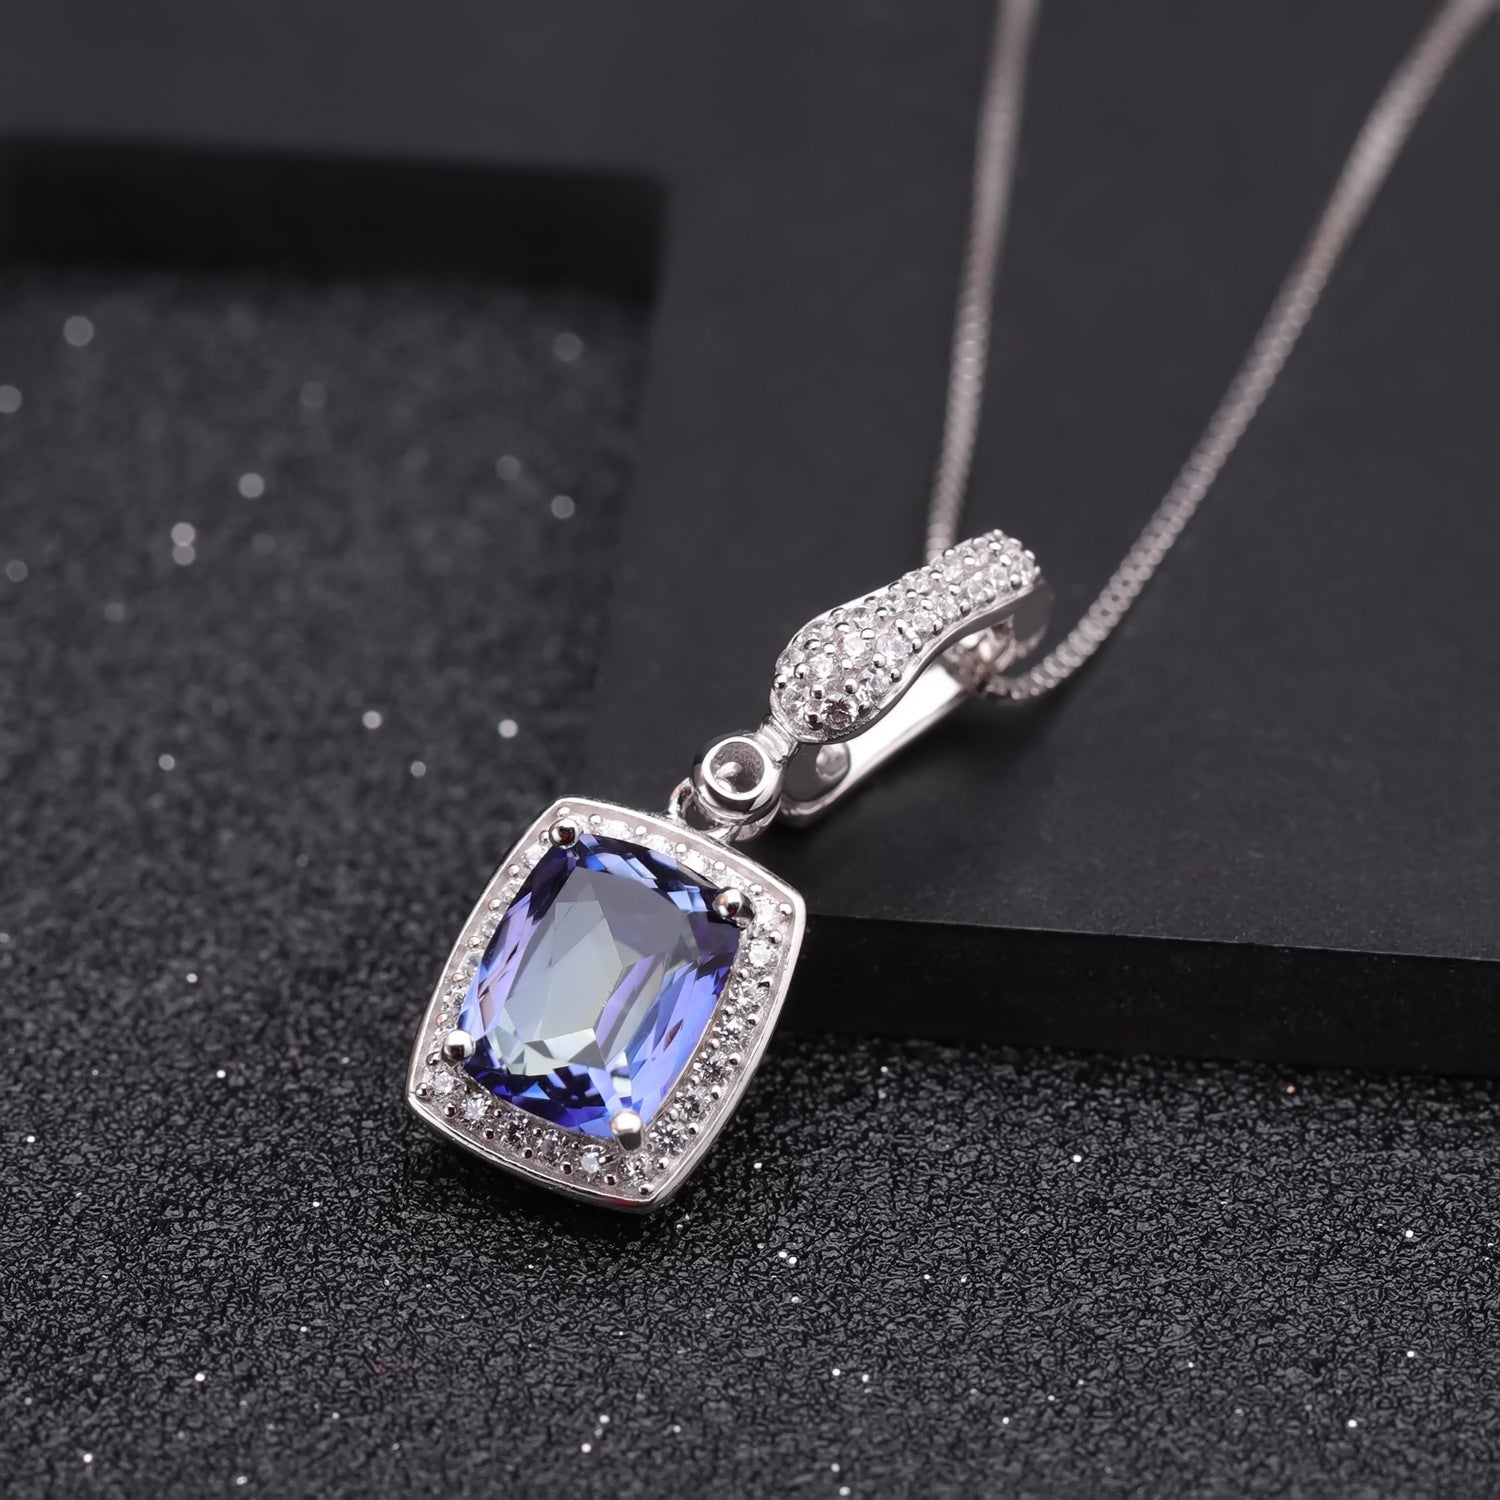 European Luxury Style Inlaid Natural Crystal Soleste Halo Pendant Silver Necklace for Women